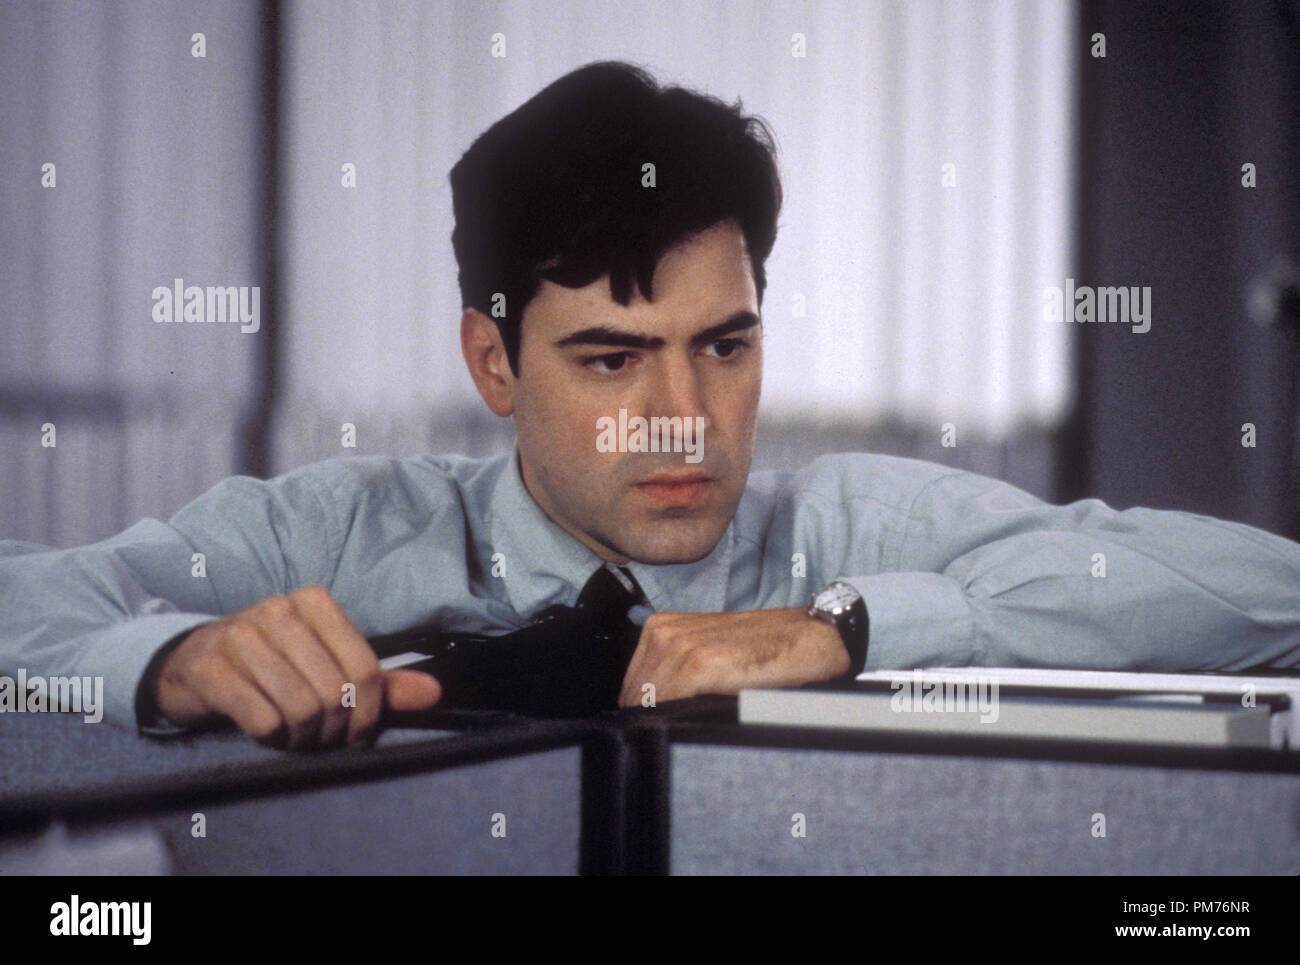 Film Still / Publicity Still from 'Office Space' Ron Livingston © 1999 20th Century Fox Photo Credit: Van Redin   File Reference # 30973501THA  For Editorial Use Only -  All Rights Reserved Stock Photo